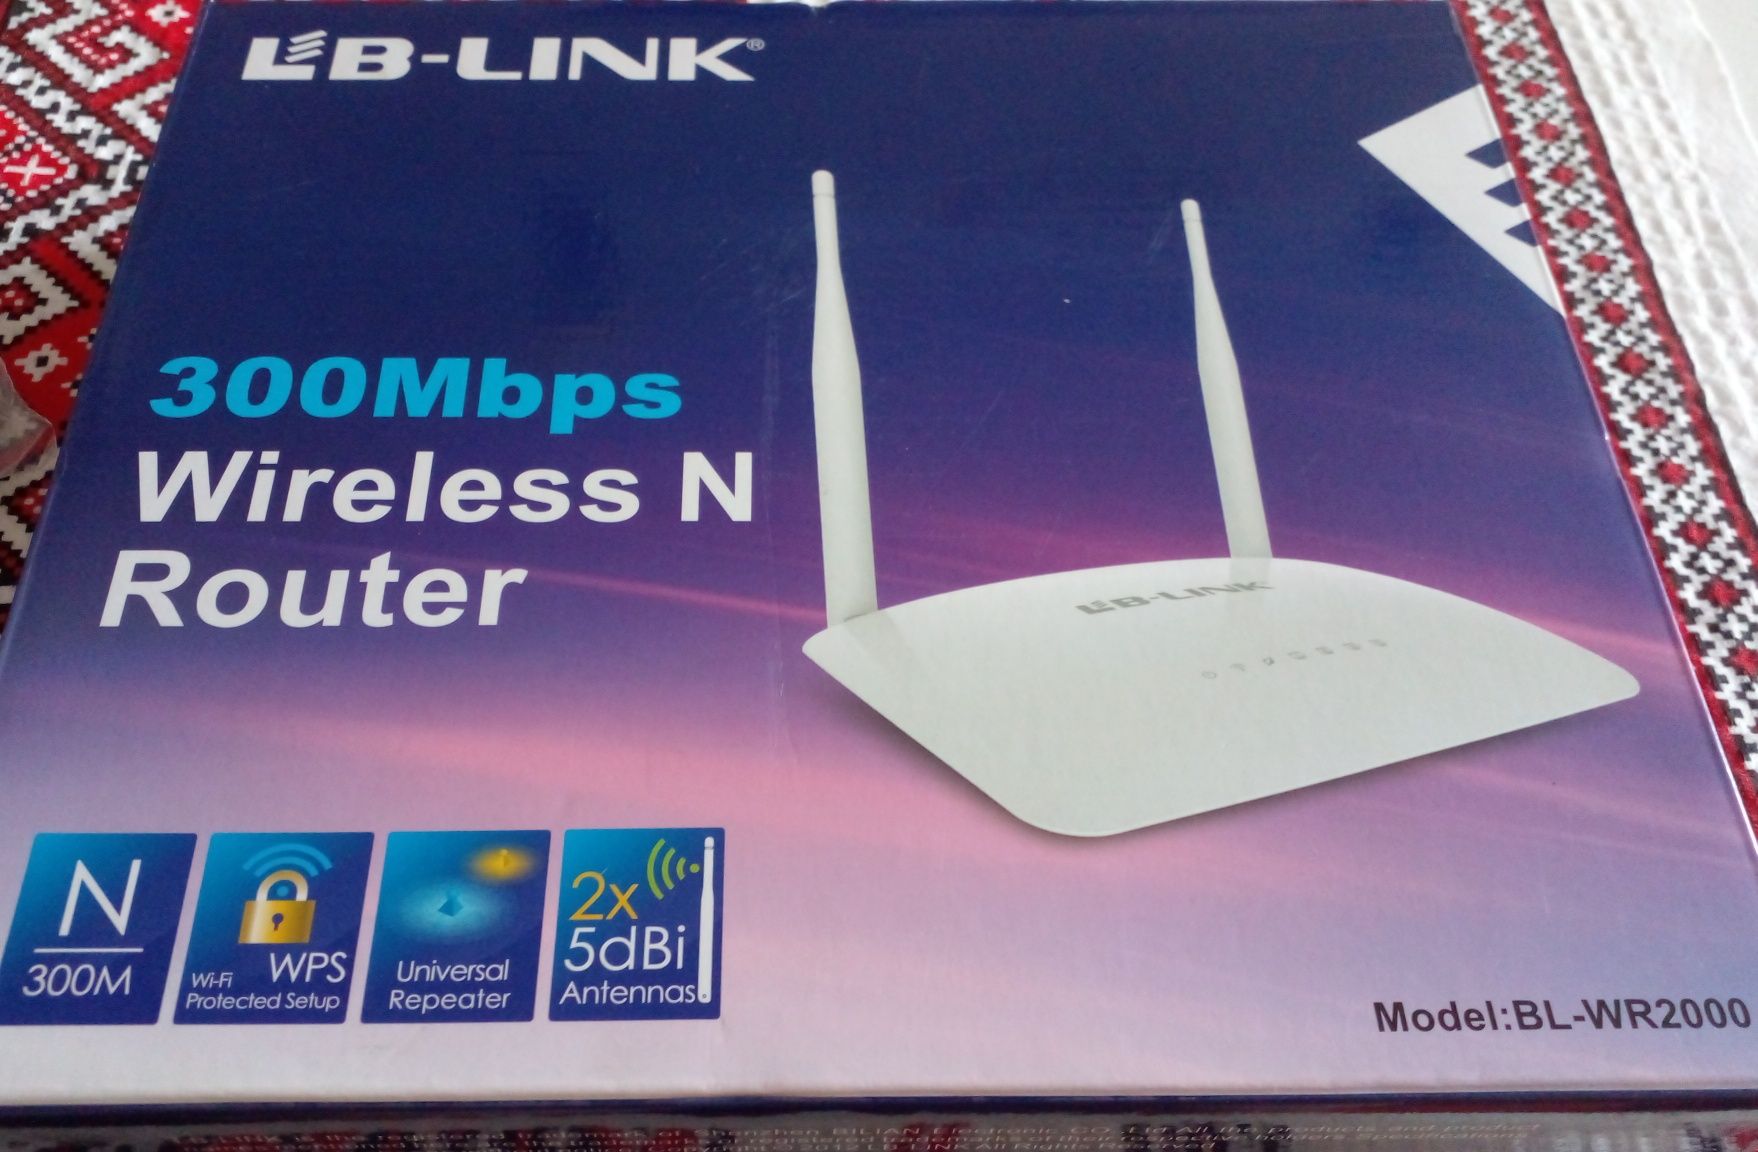 Router LB-Link wireless